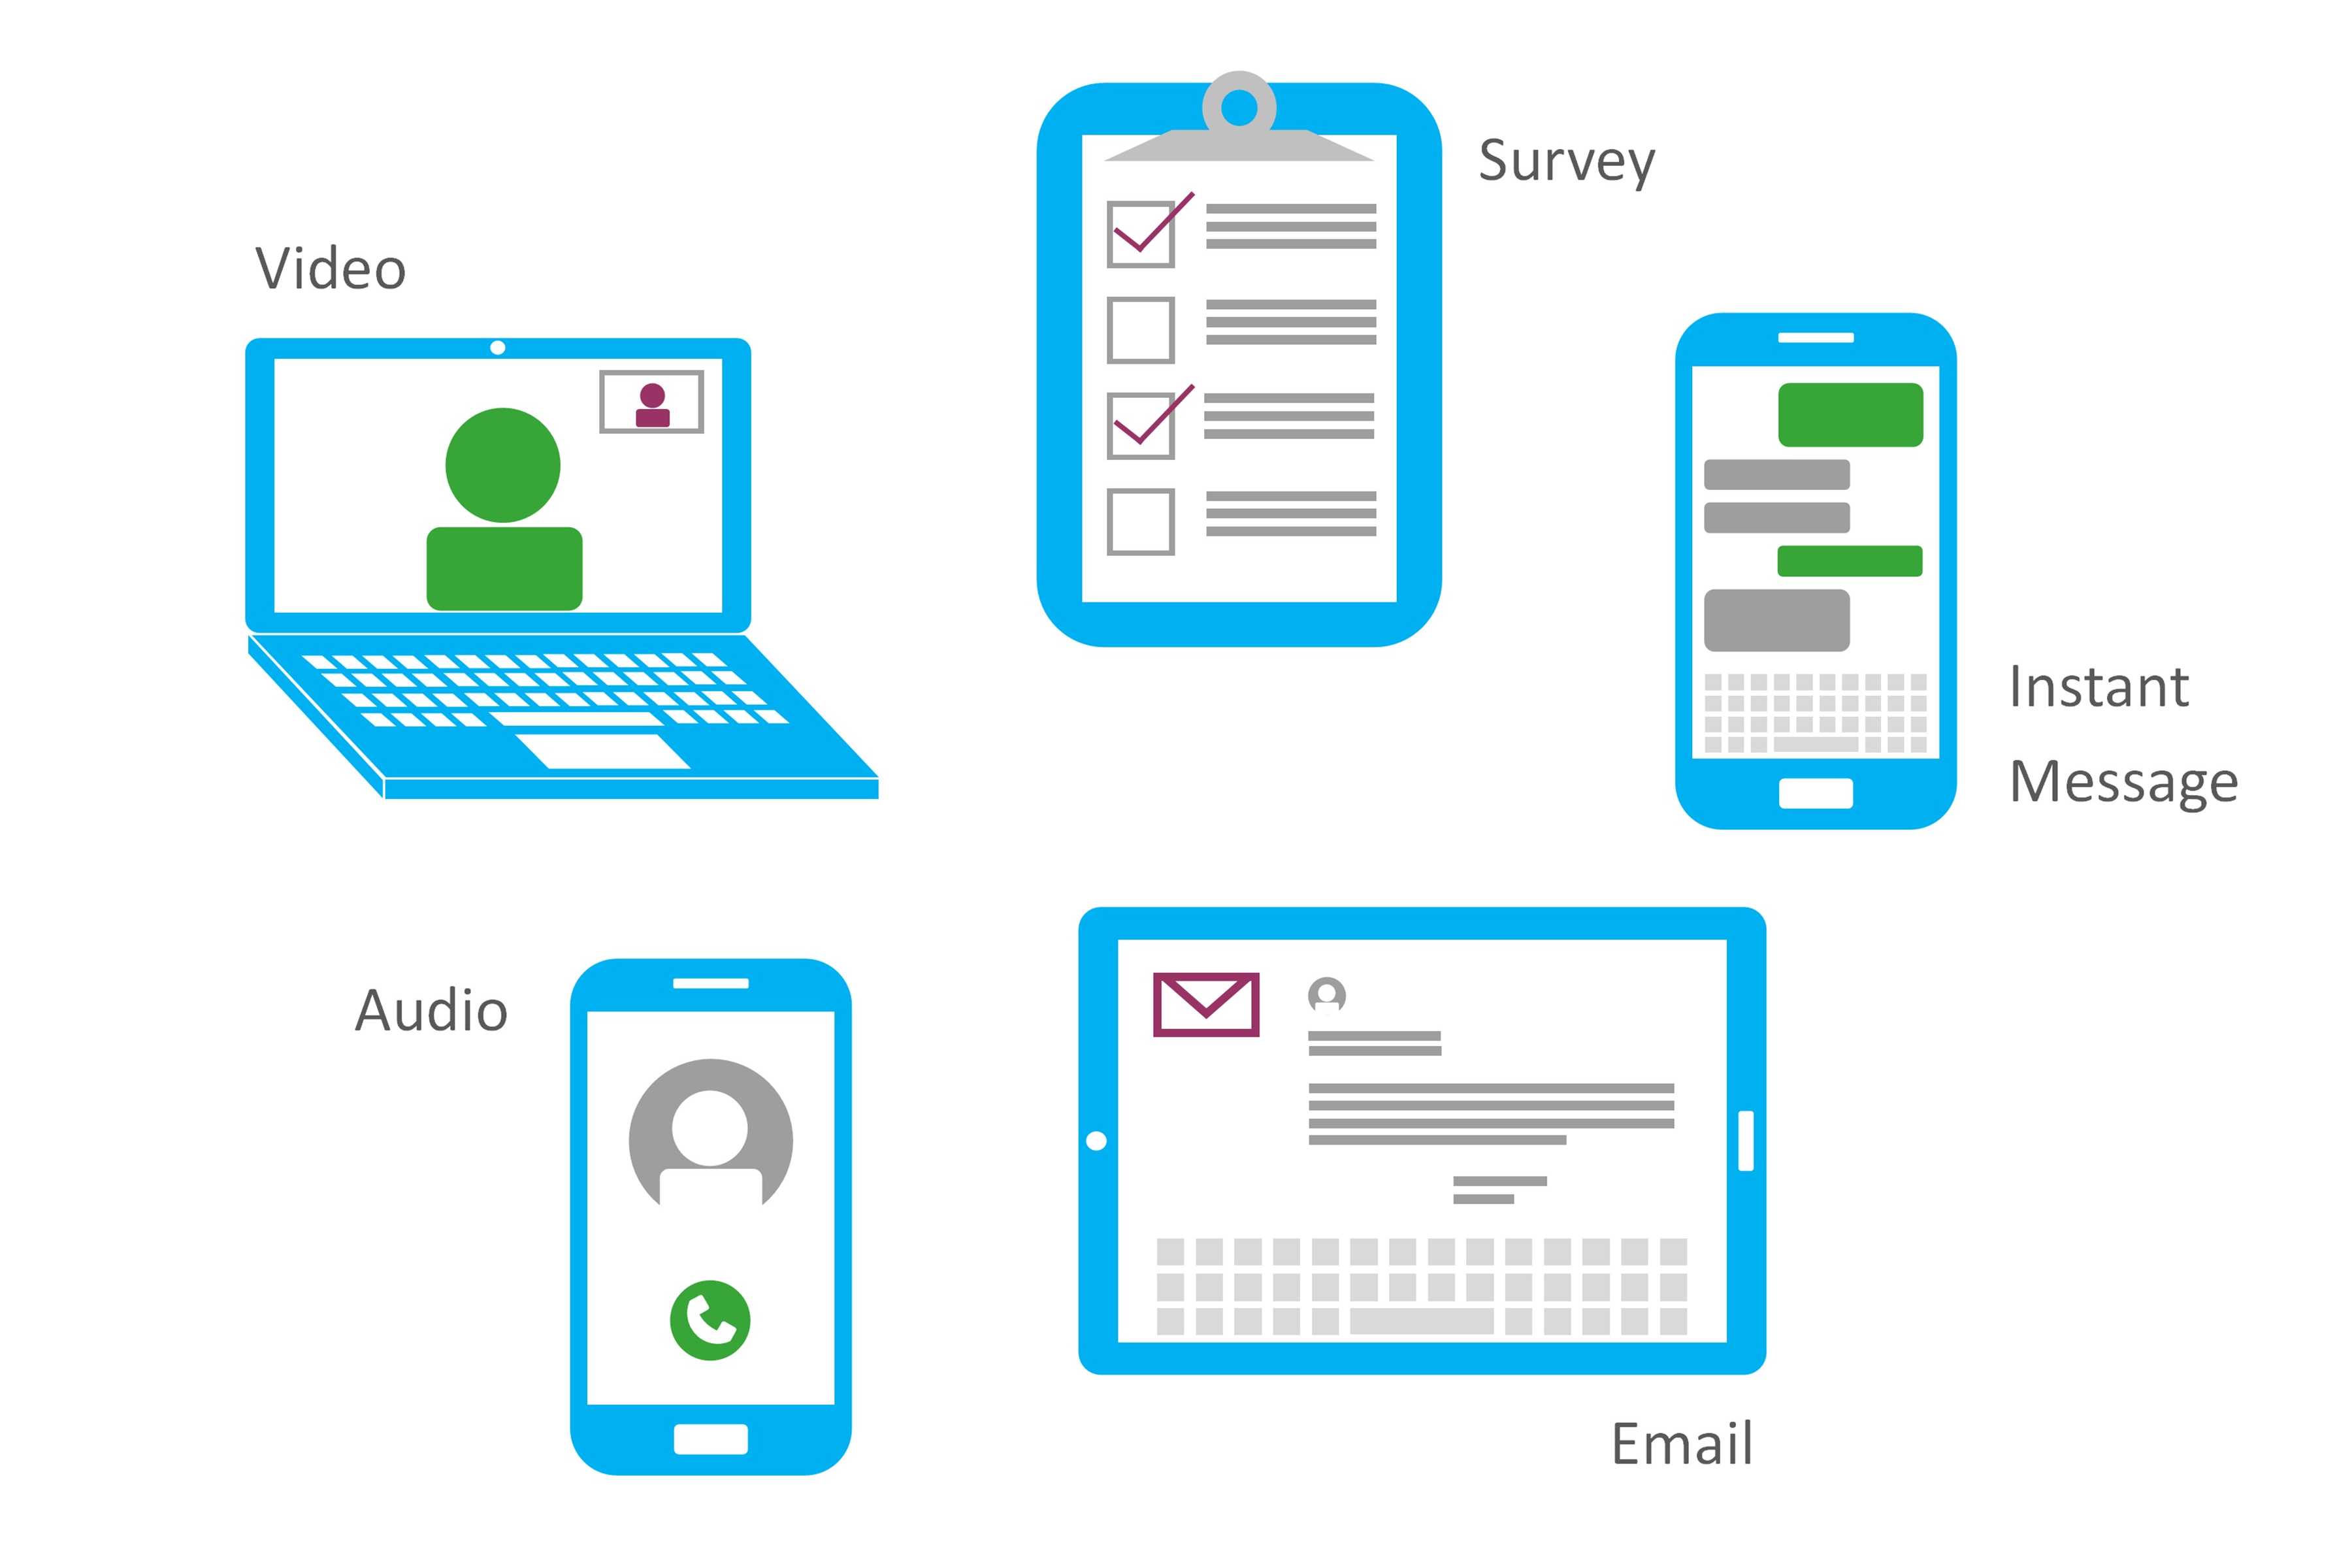 Icons of survey, email, instant message, audio, video interview modes used in the research study